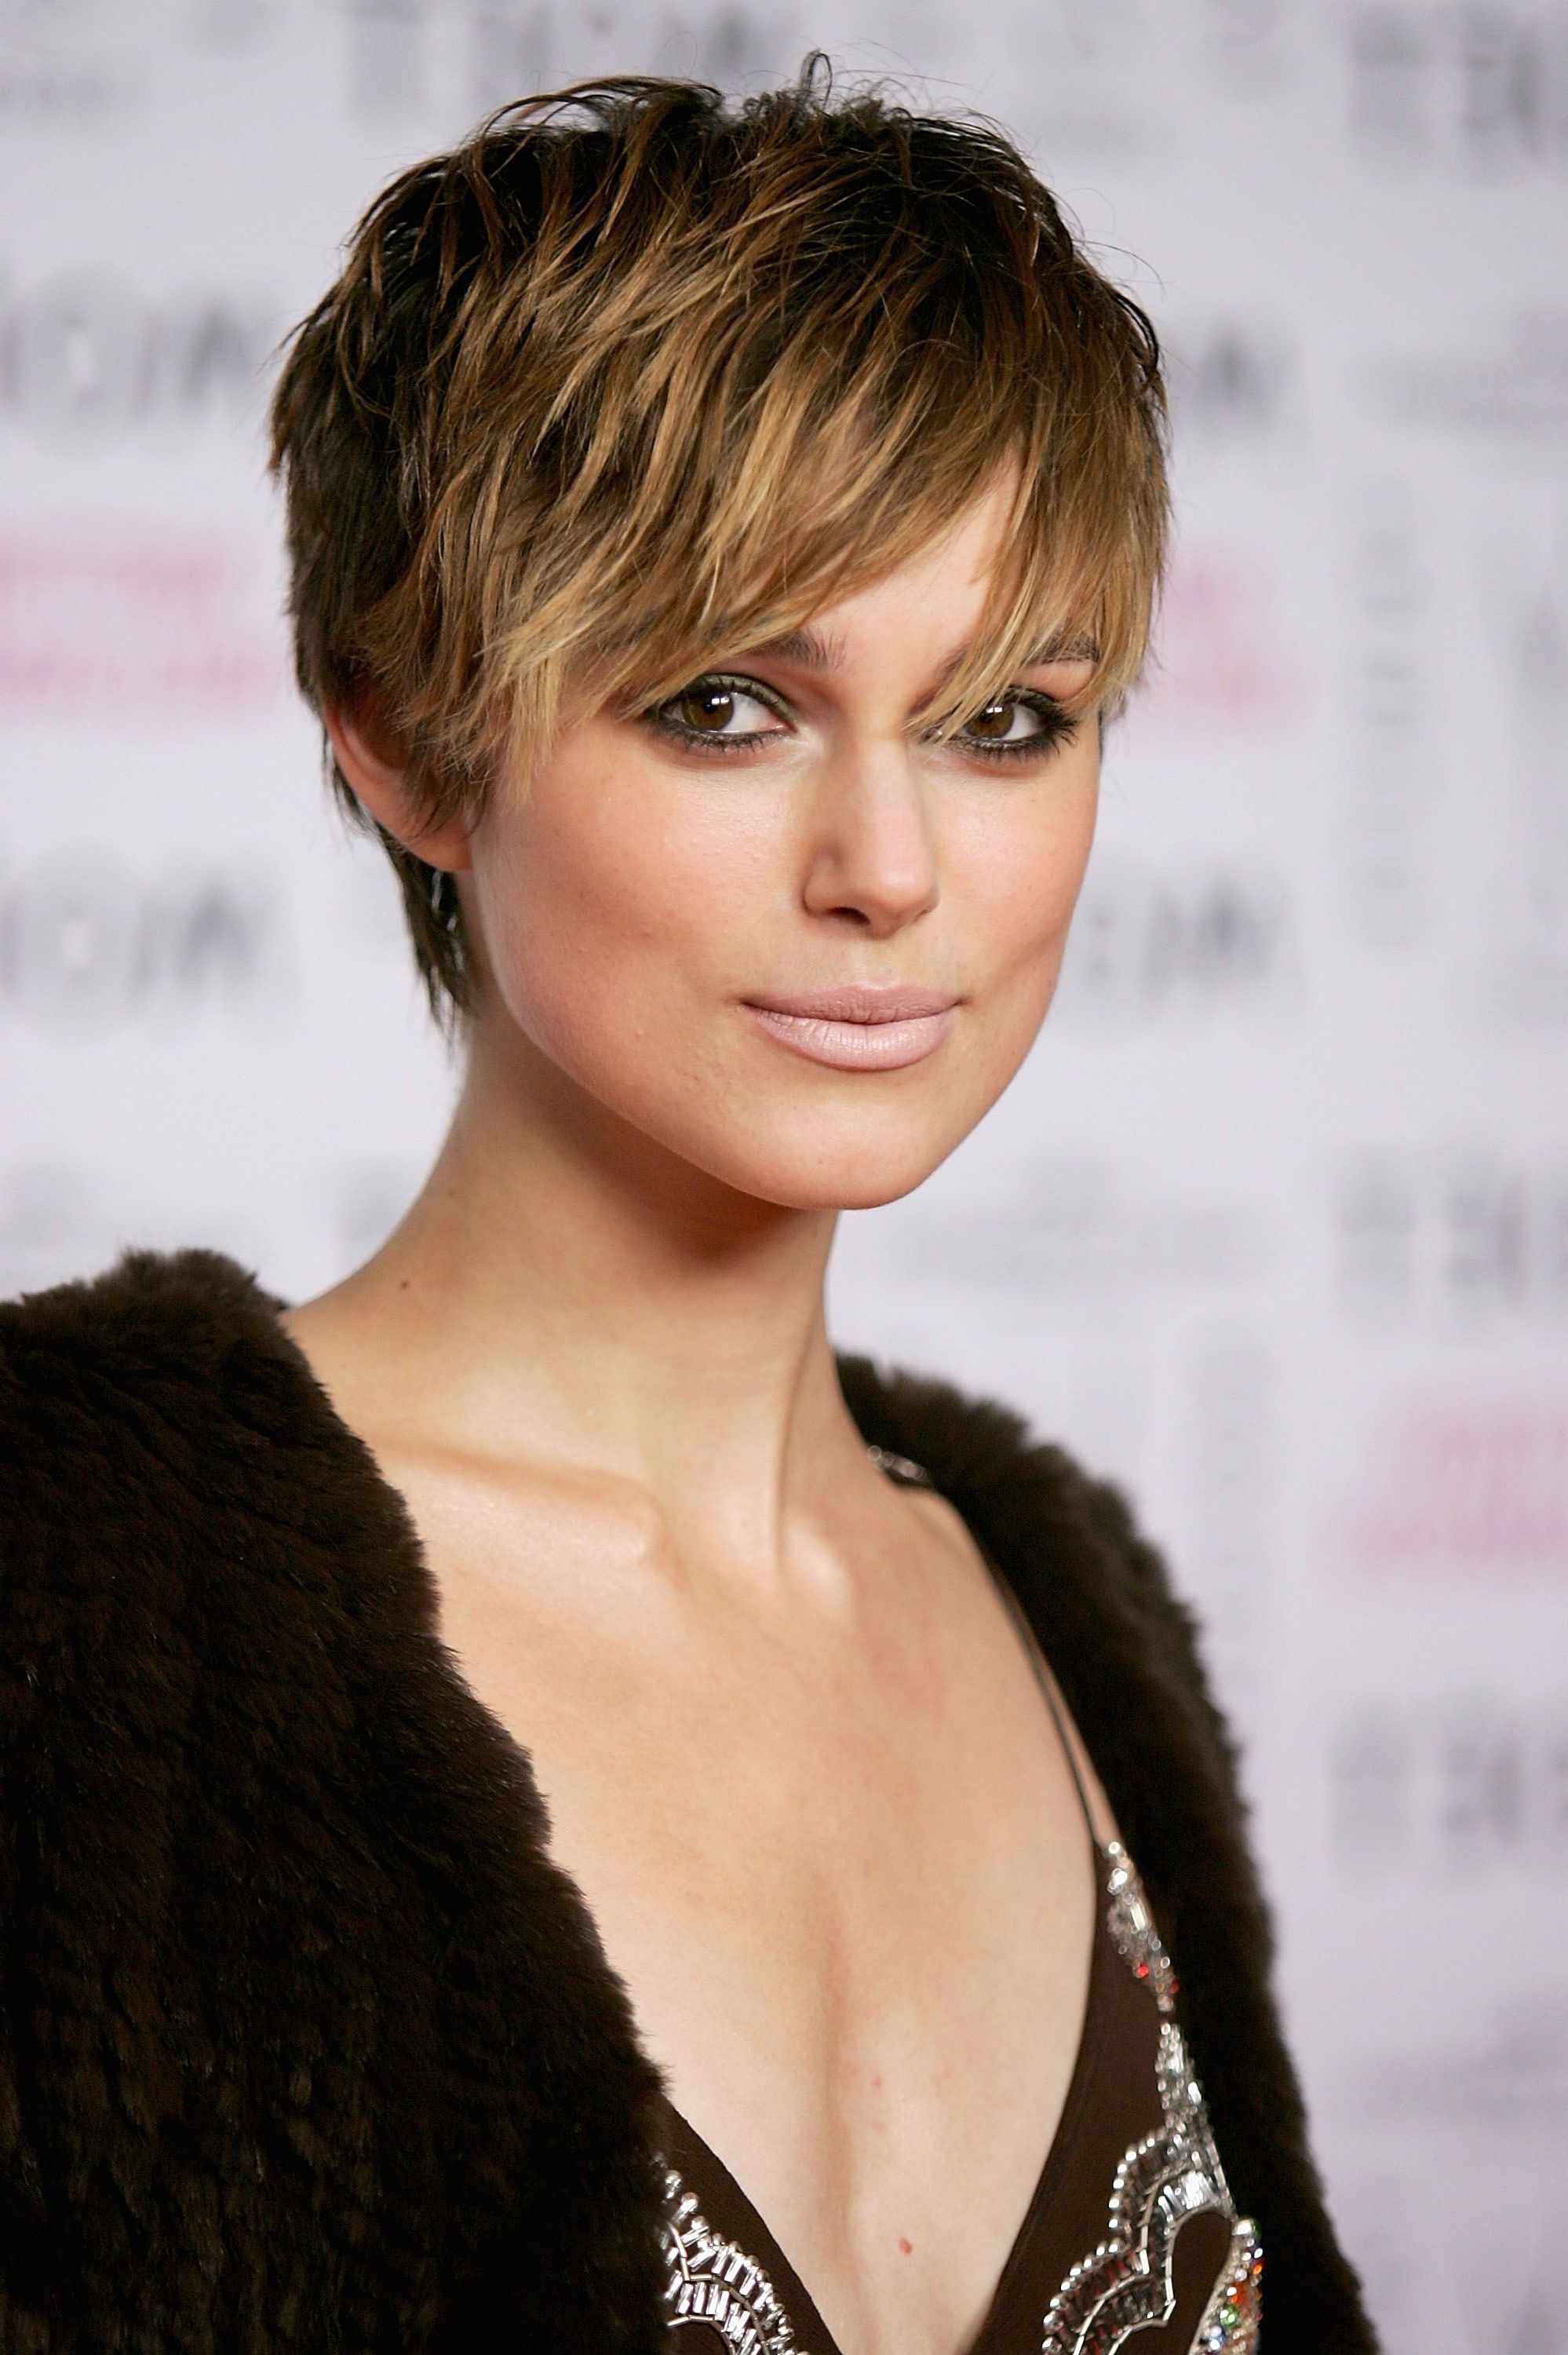 Widely Used Rocker Pixie Hairstyles With 53 Best Pixie Cut Hairstyle Ideas 2018 – Cute Celebrity Pixie Haircuts (View 5 of 20)